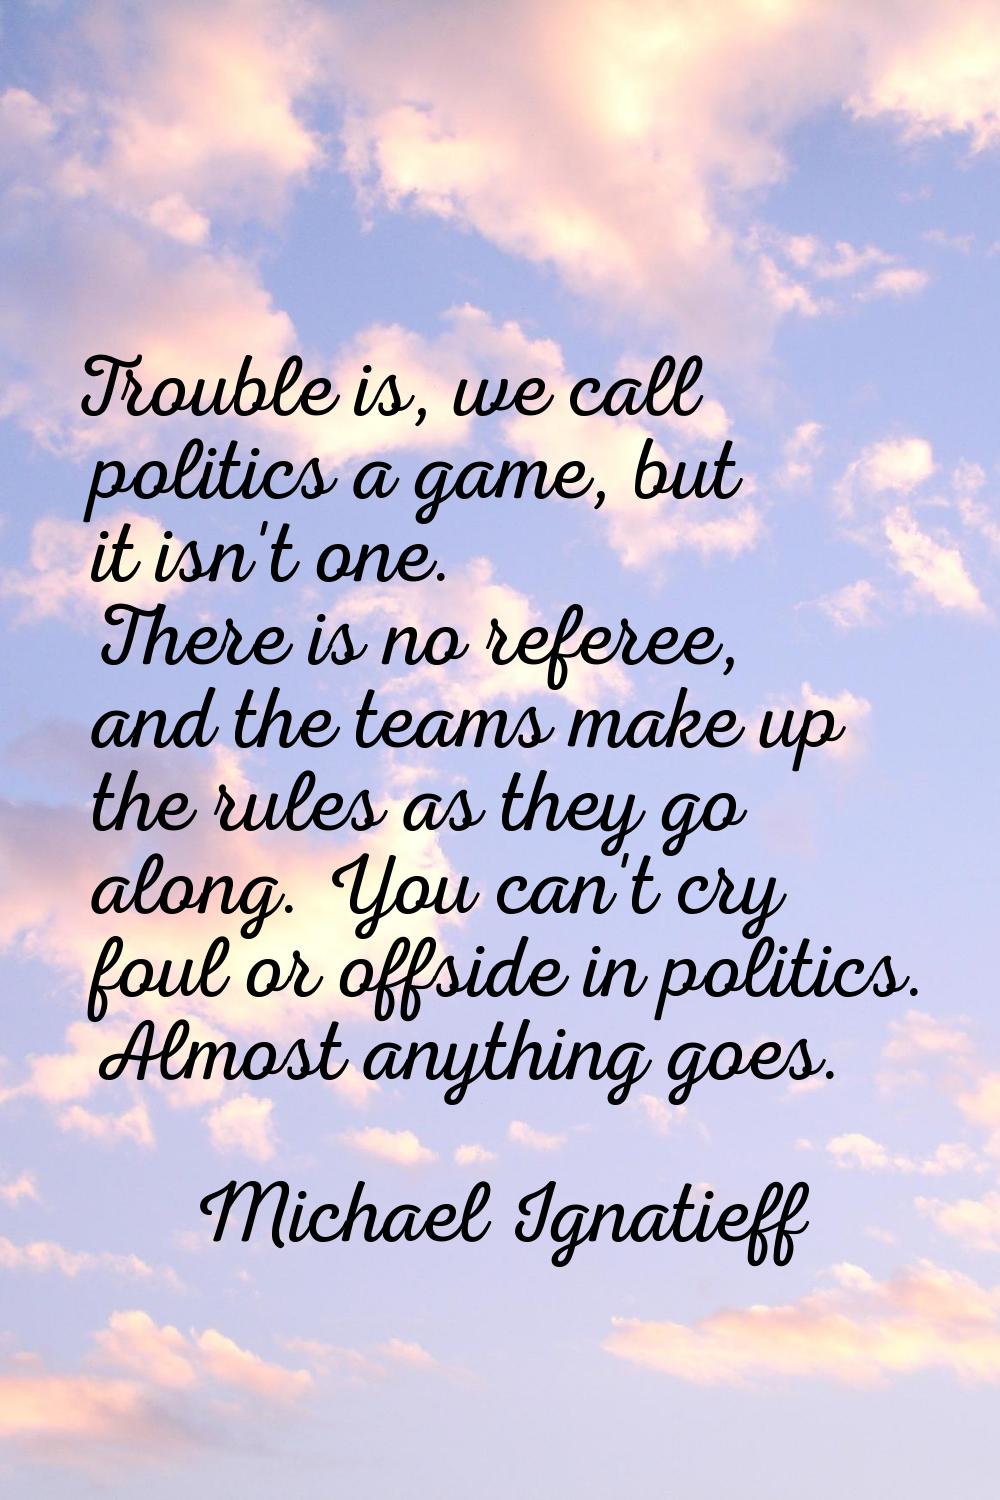 Trouble is, we call politics a game, but it isn't one. There is no referee, and the teams make up t